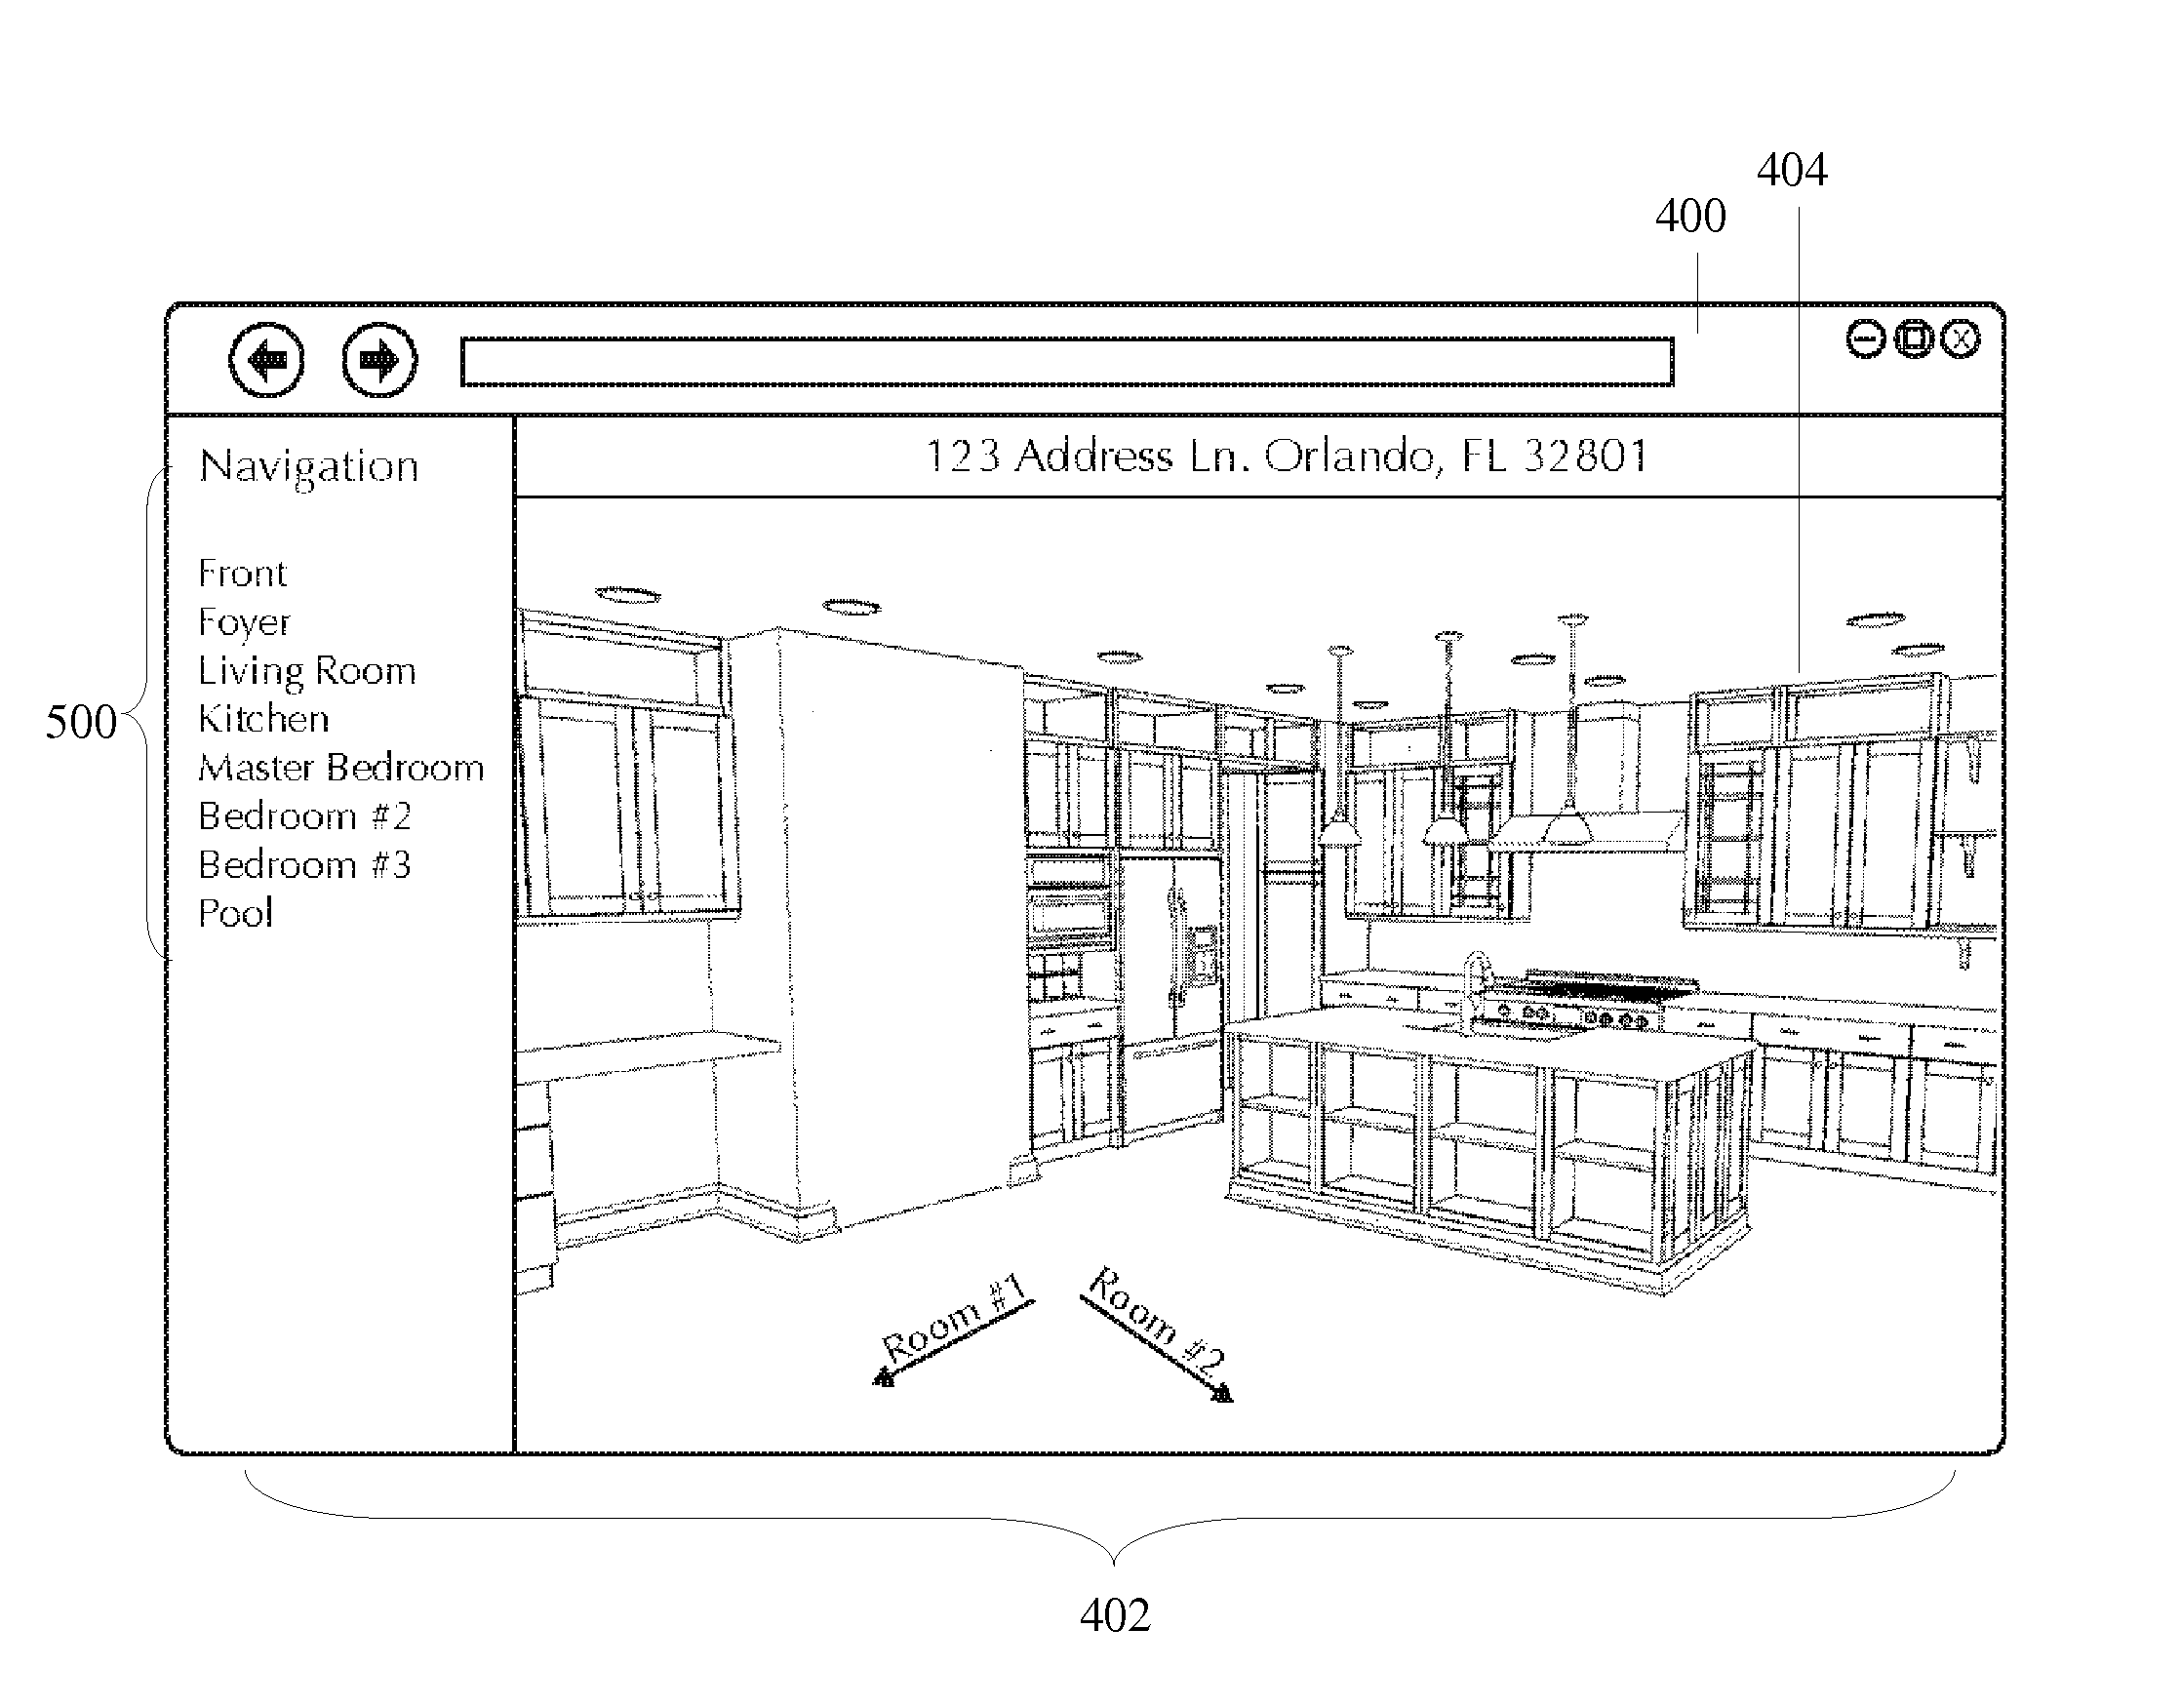 Multi-component method of creating computer models of real estate properties for the purpose of conducting virtual and interactive real estate tours